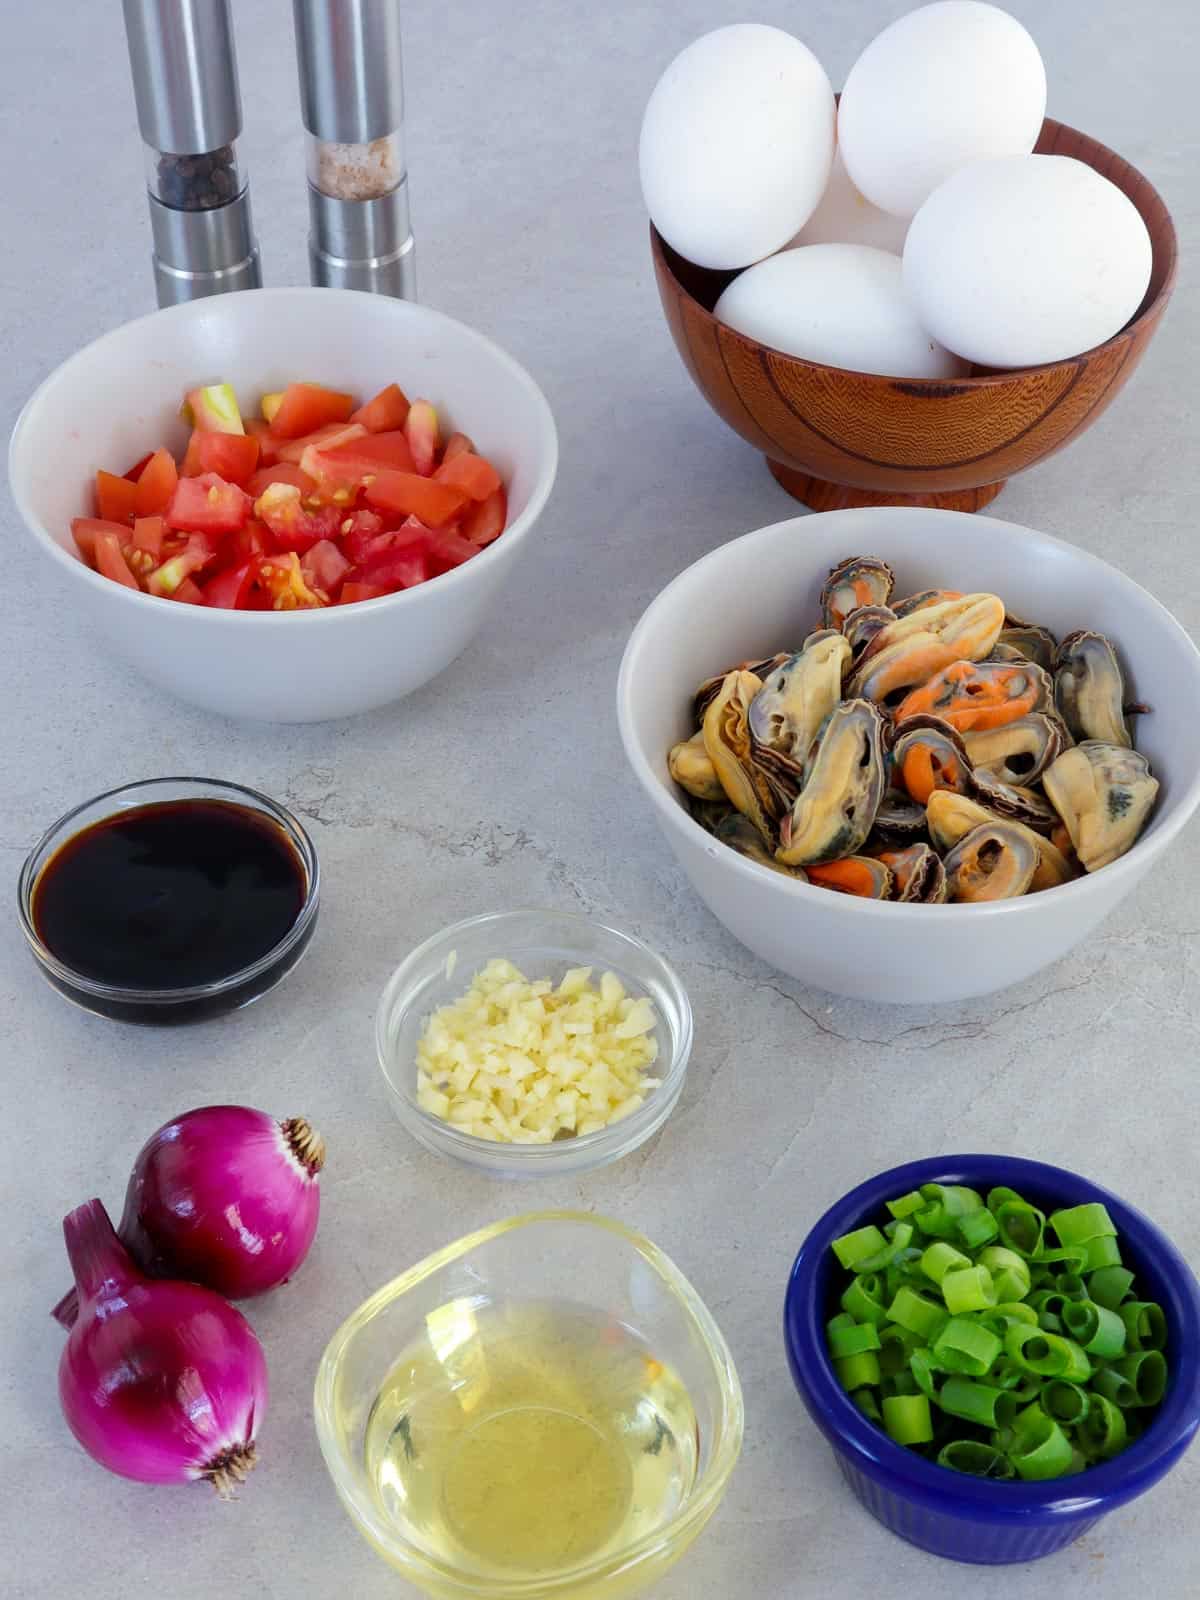 mussel meat, tomatoes, eggs, green onions, onions, garlic, oyster sauce, oil in bowls, and salt and pepper shakers